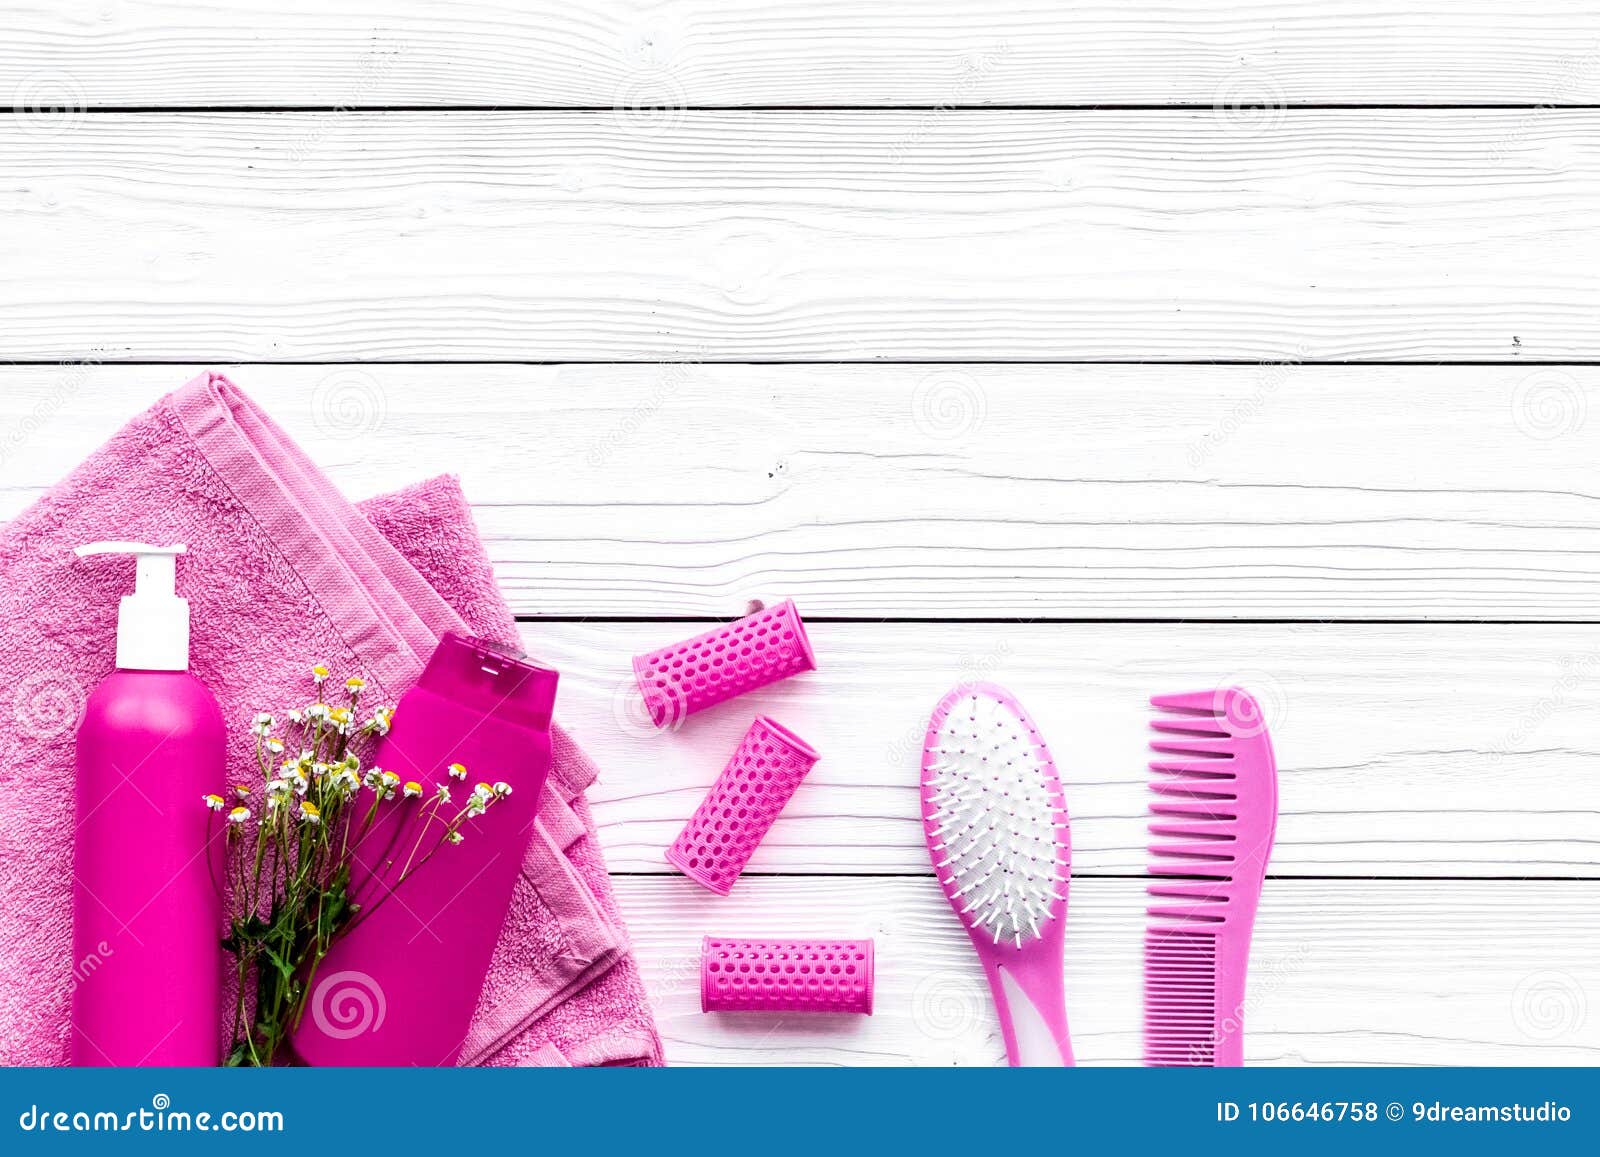 Hair Washing and Styling Tools. Comb, Shampoo, Hairspray, Curlers on ...